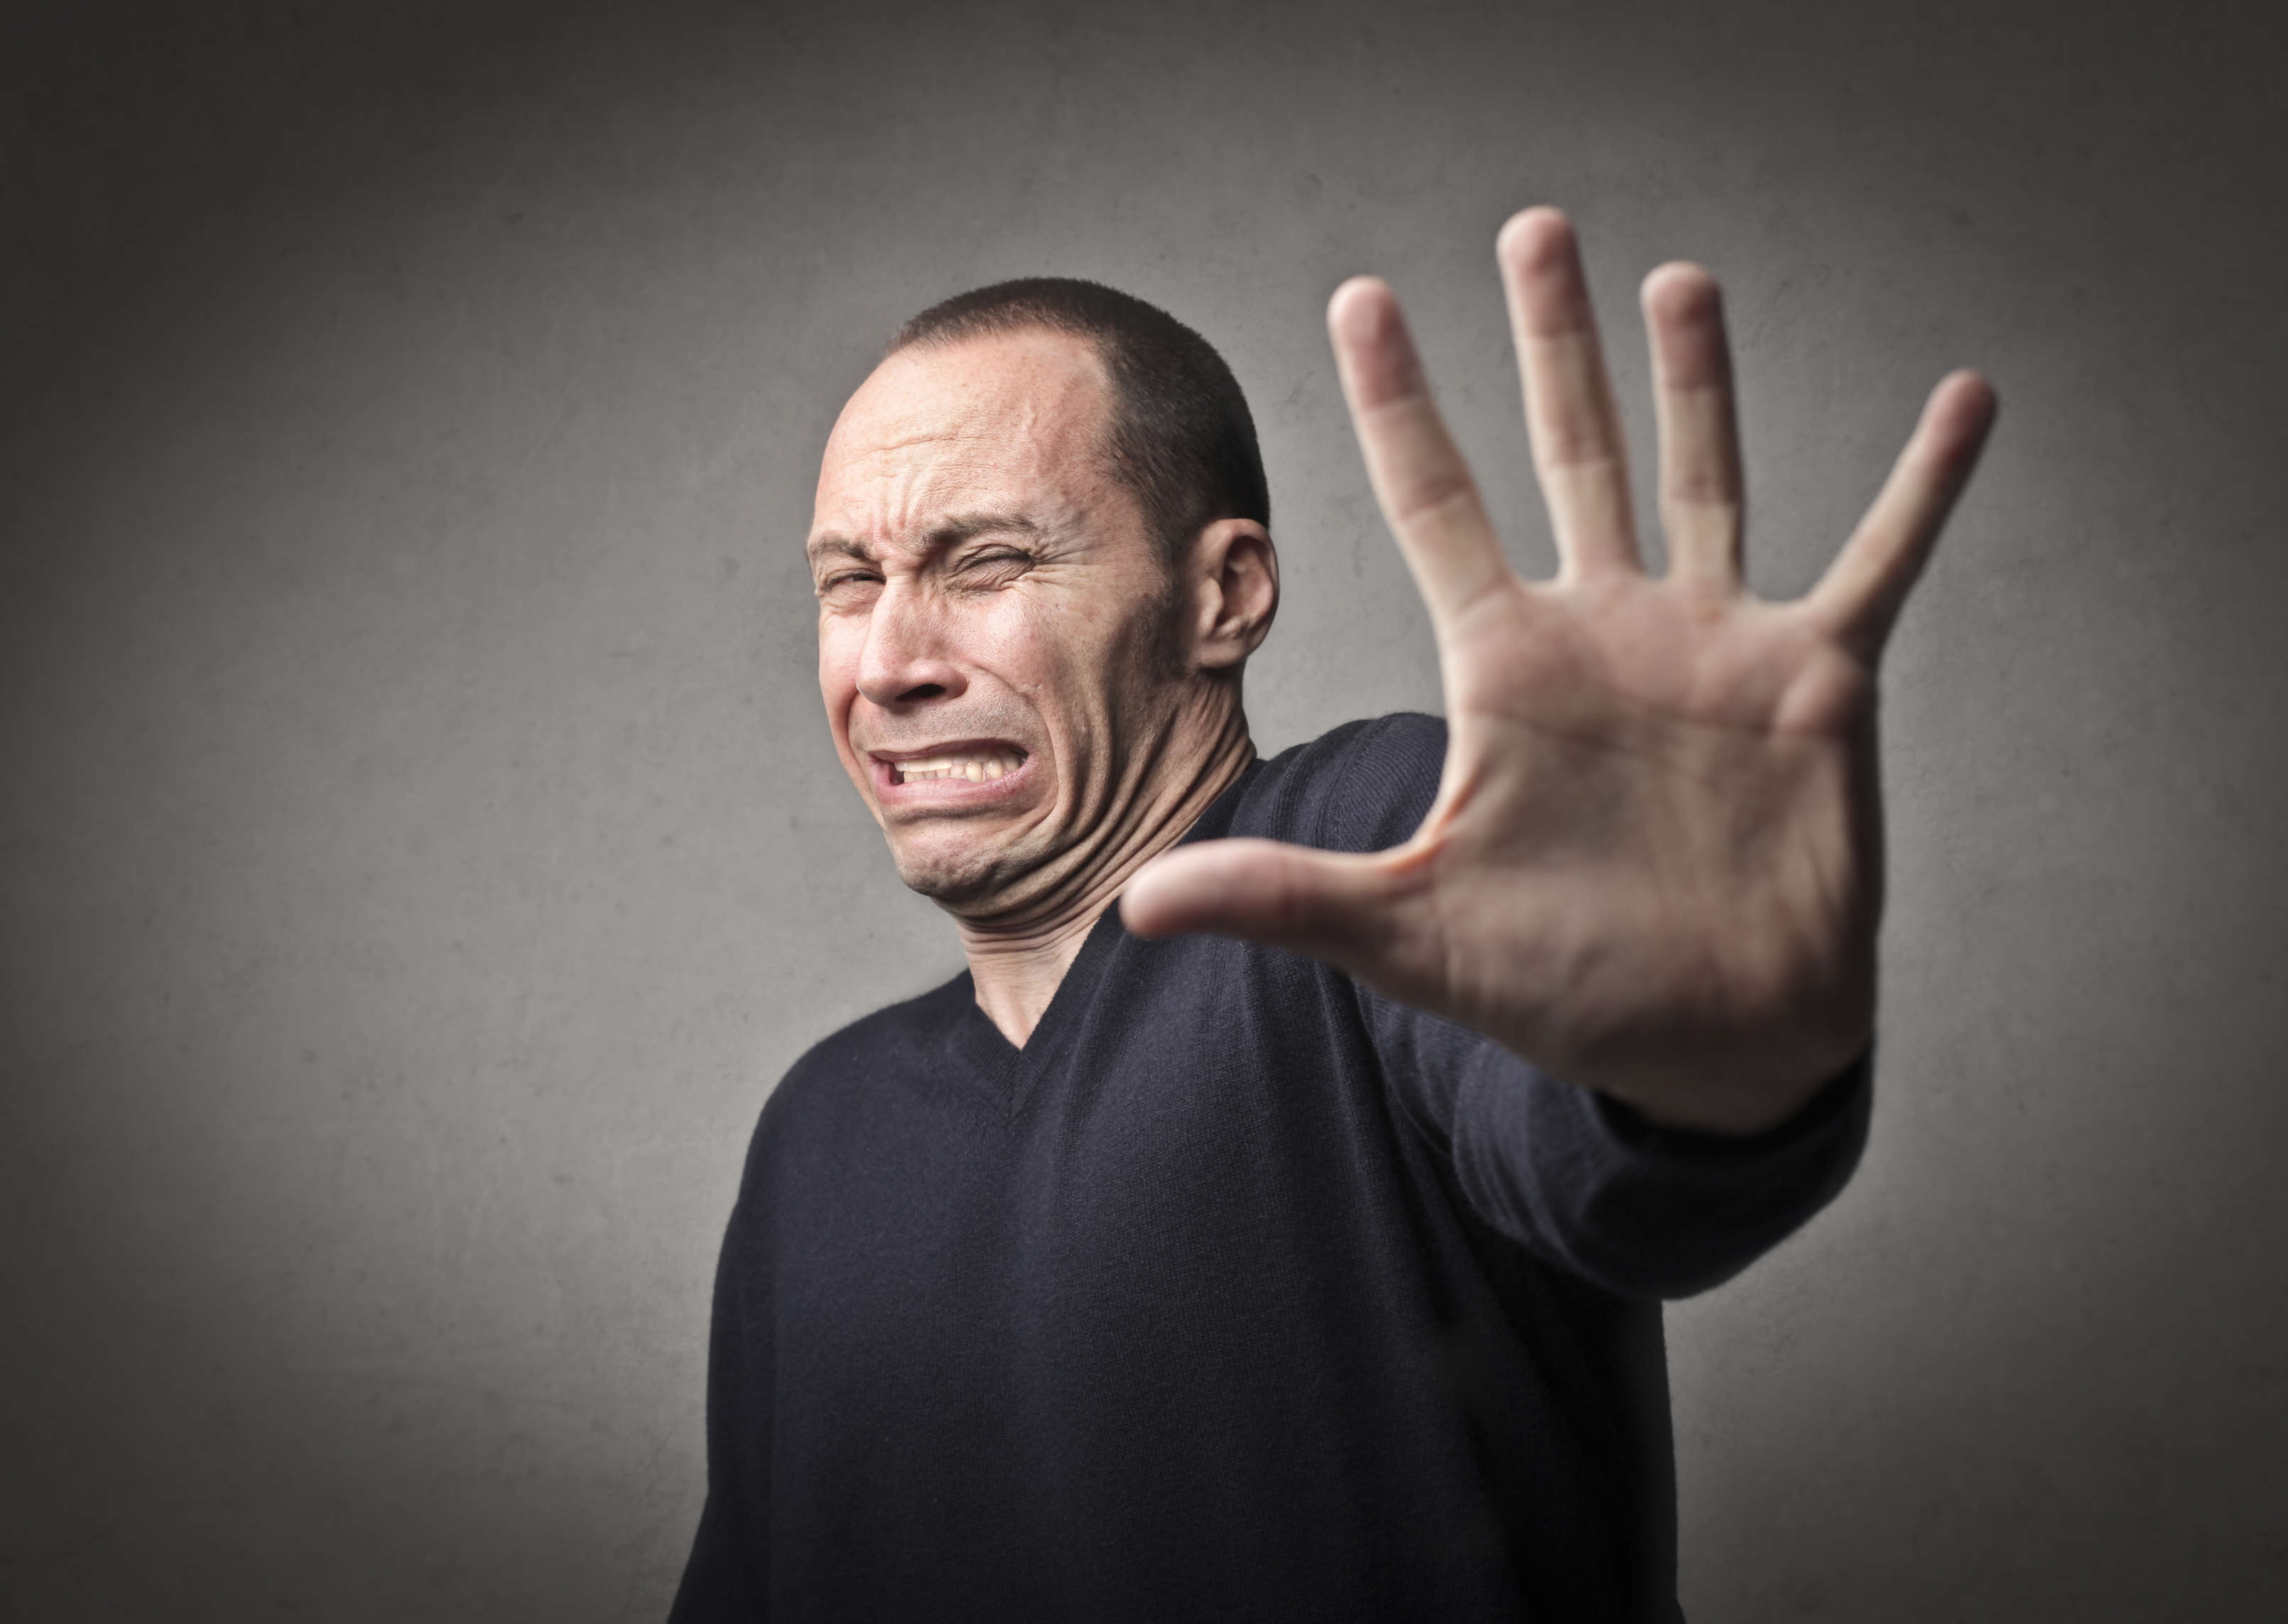 Scared man indicating to halt with his hand | Source: Shutterstock.com